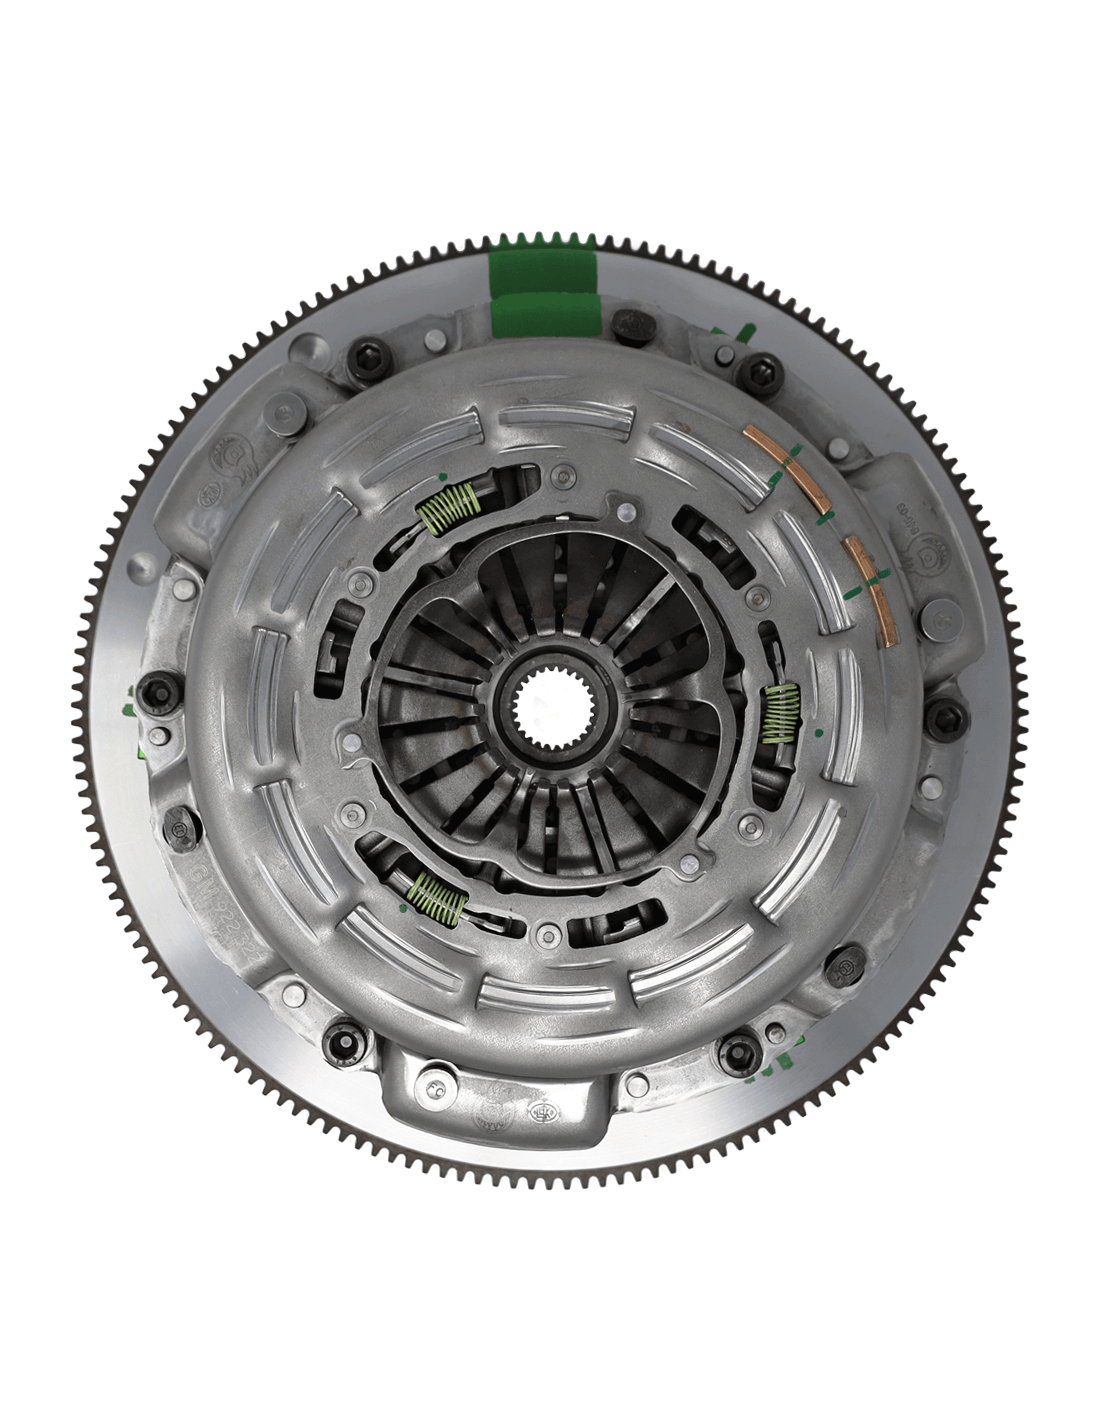 Monster Clutch Co. SC Series Twin Disc Clutch (700-1000RWHP) for Gen 5 (2010-2015) Chevrolet Camaro SS